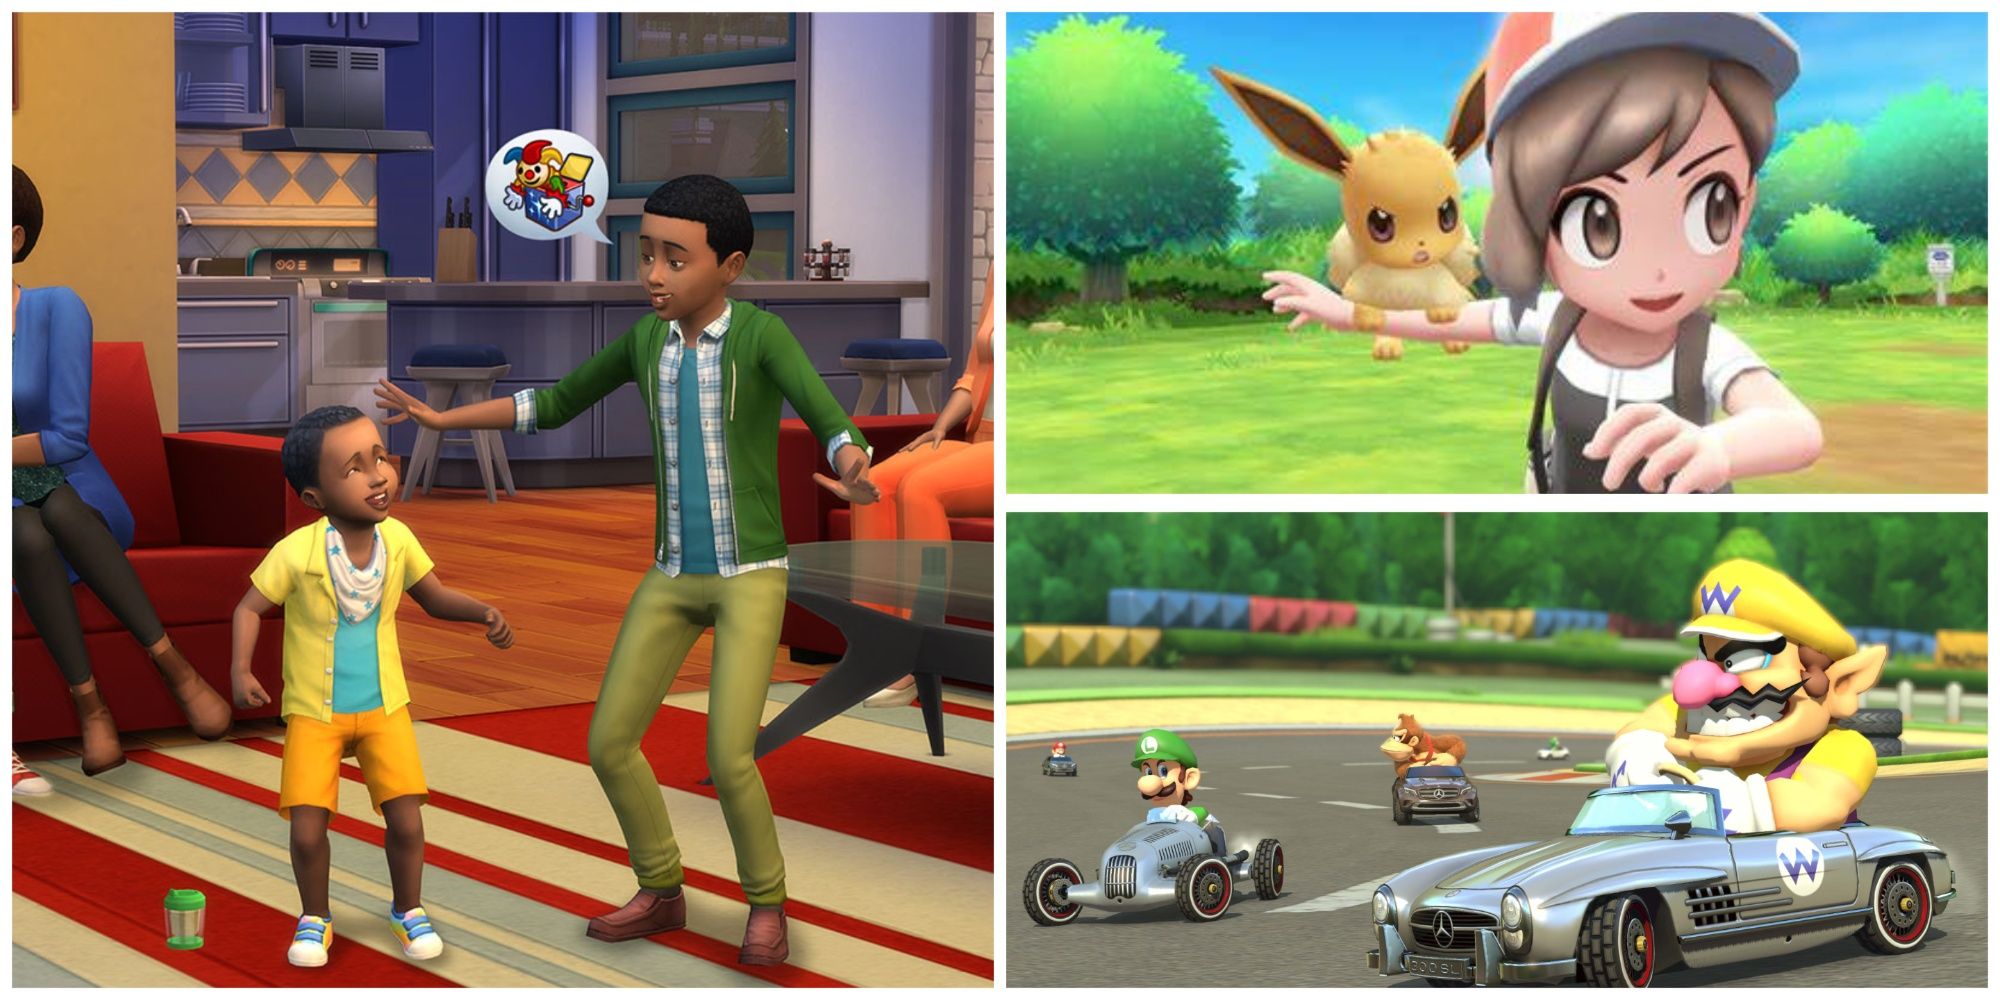 Video Games For New Gamers (The Sims 4, Pokemon Let's Go!, and Mario Kart 8)